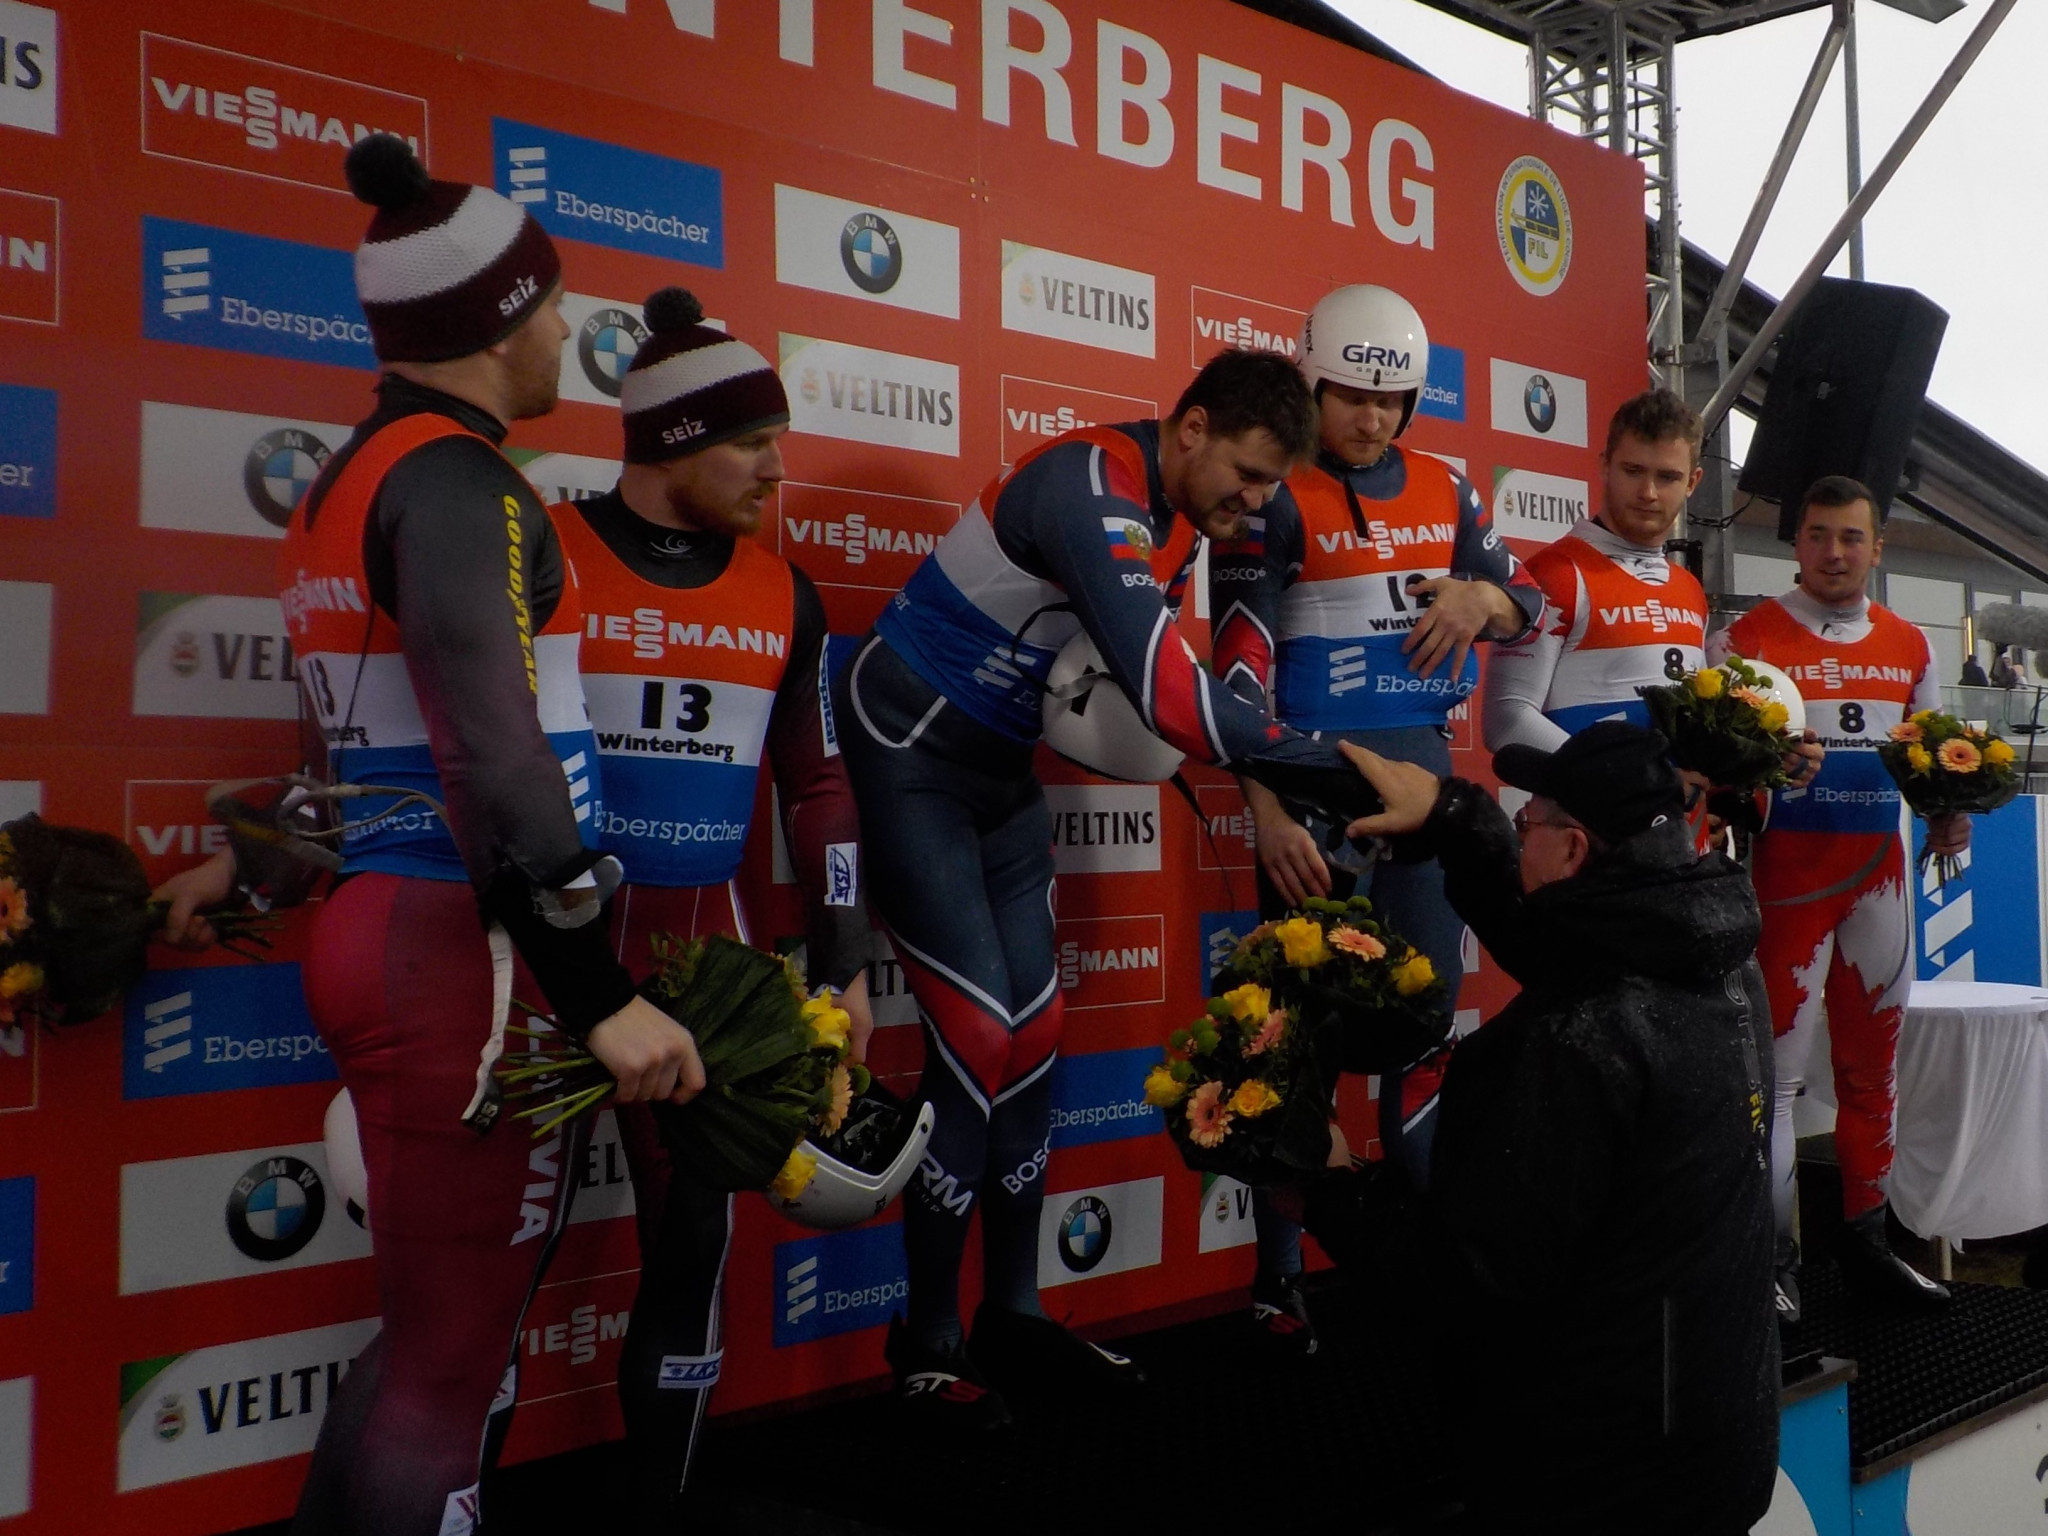 Russia win two golds at Luge World Cup after Germans skip own event due to safety fears